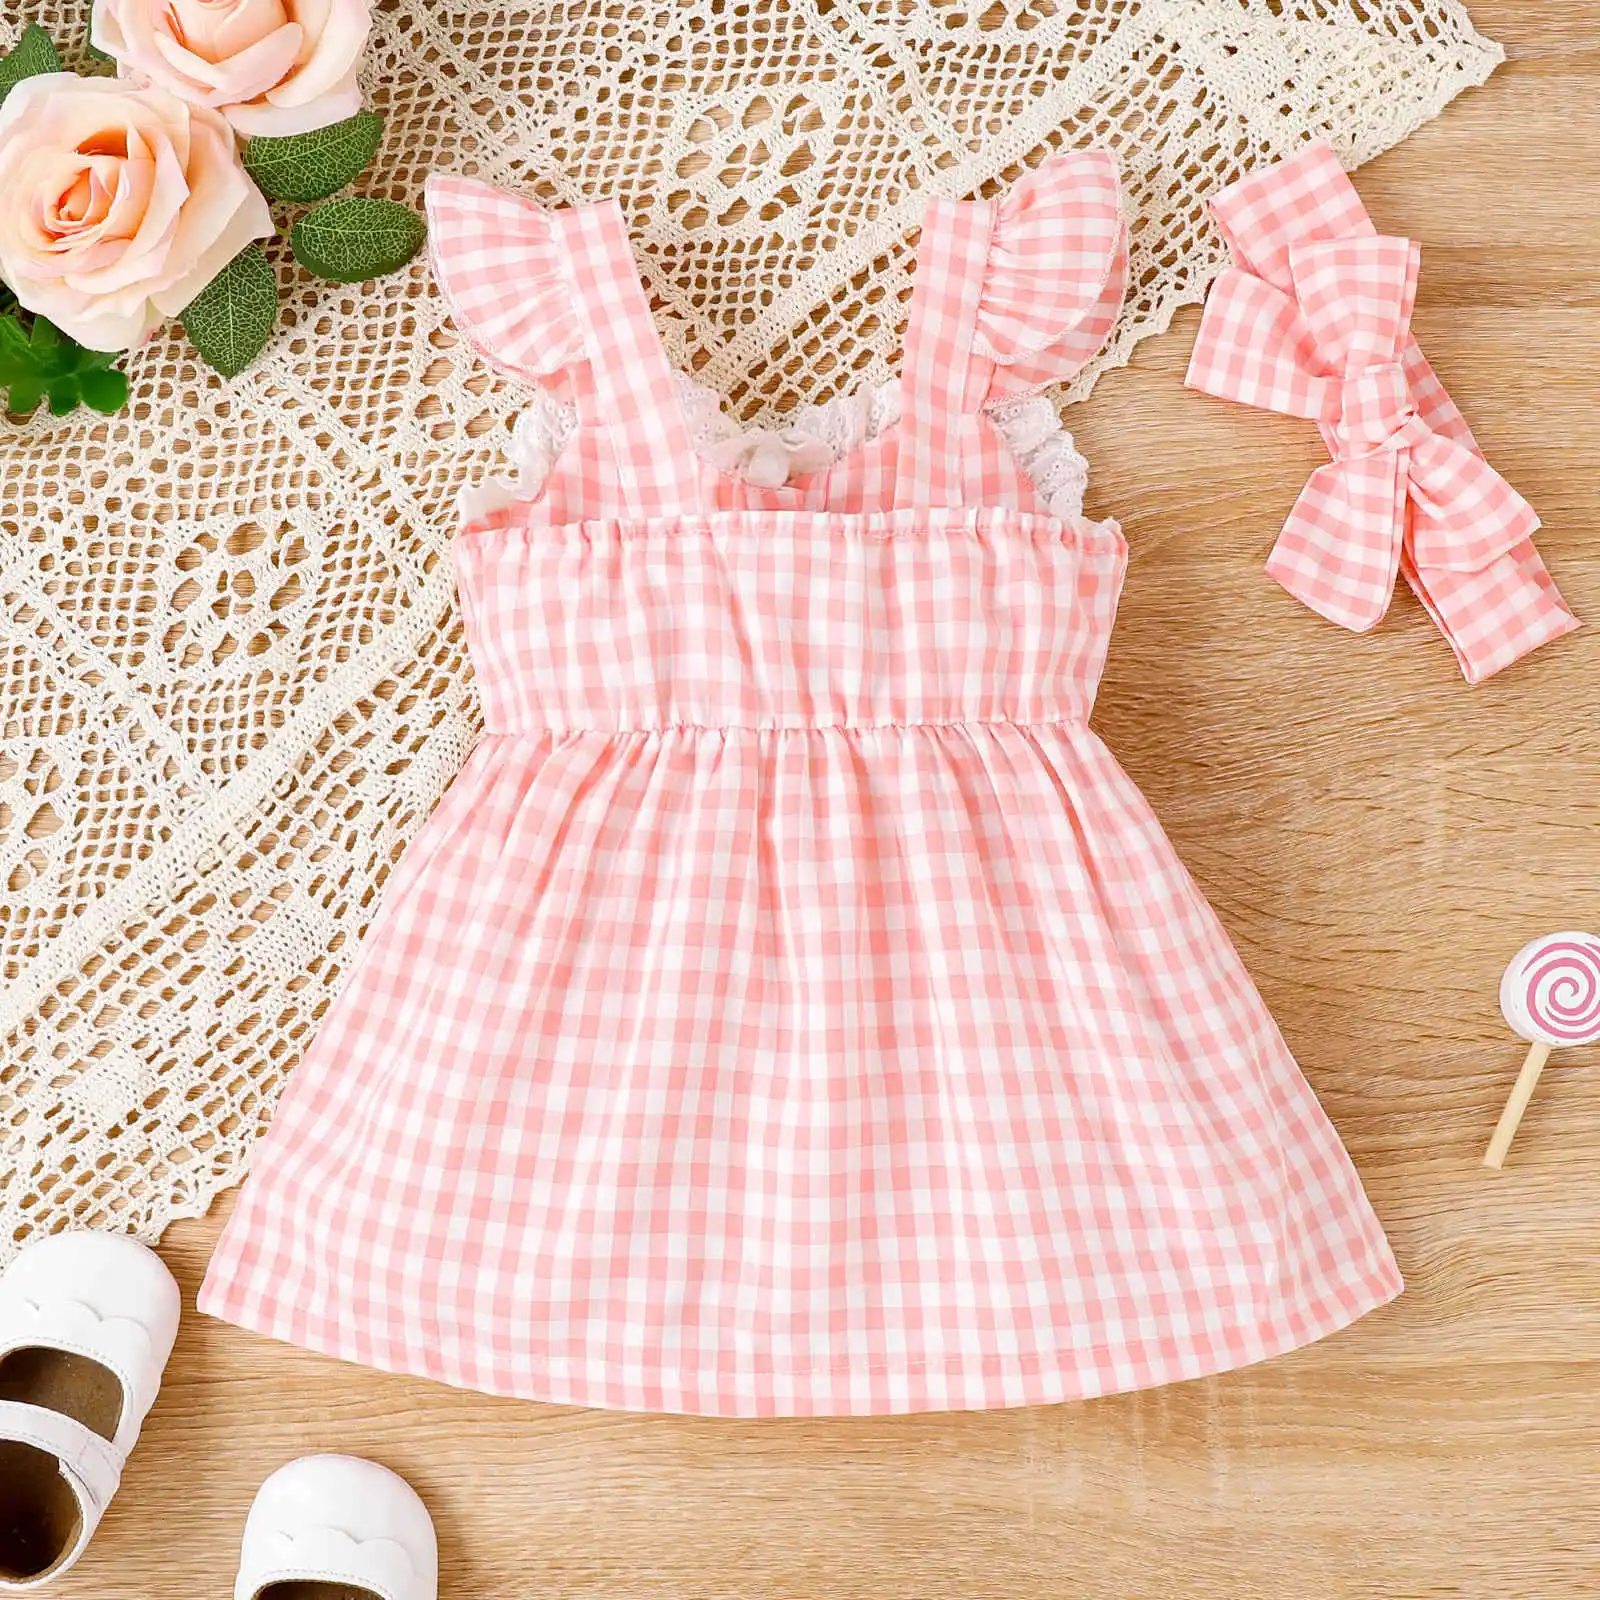 New trendy summer casual dresses sleeveless plaid design boutique toddler baby girls one-piece clothing kids dresses